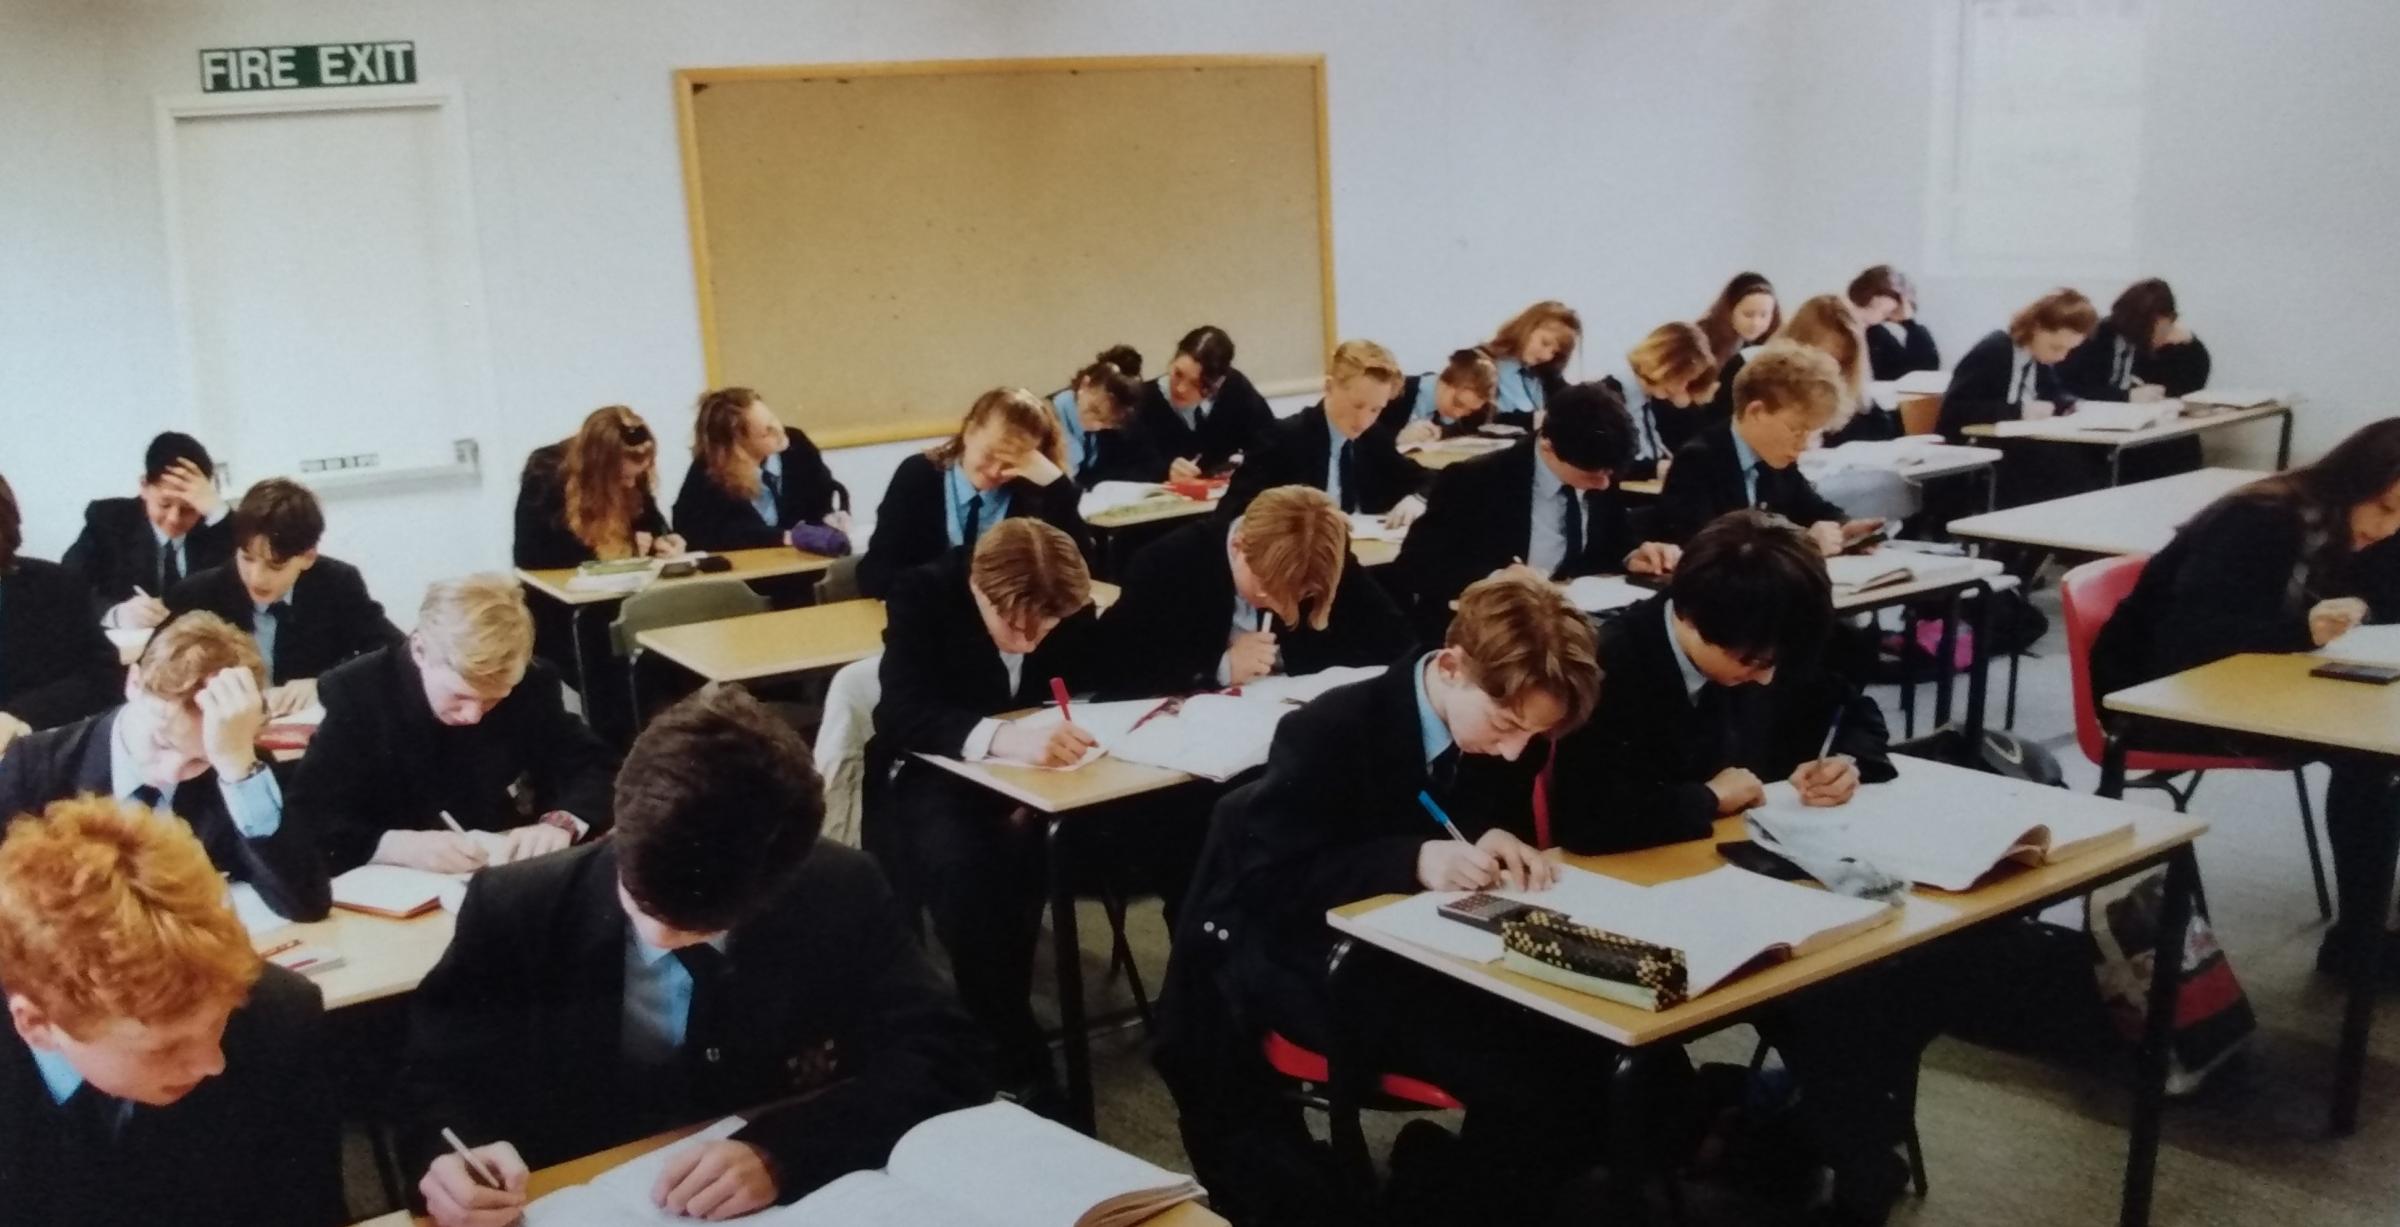 Hard at work in the classroom in March 1993